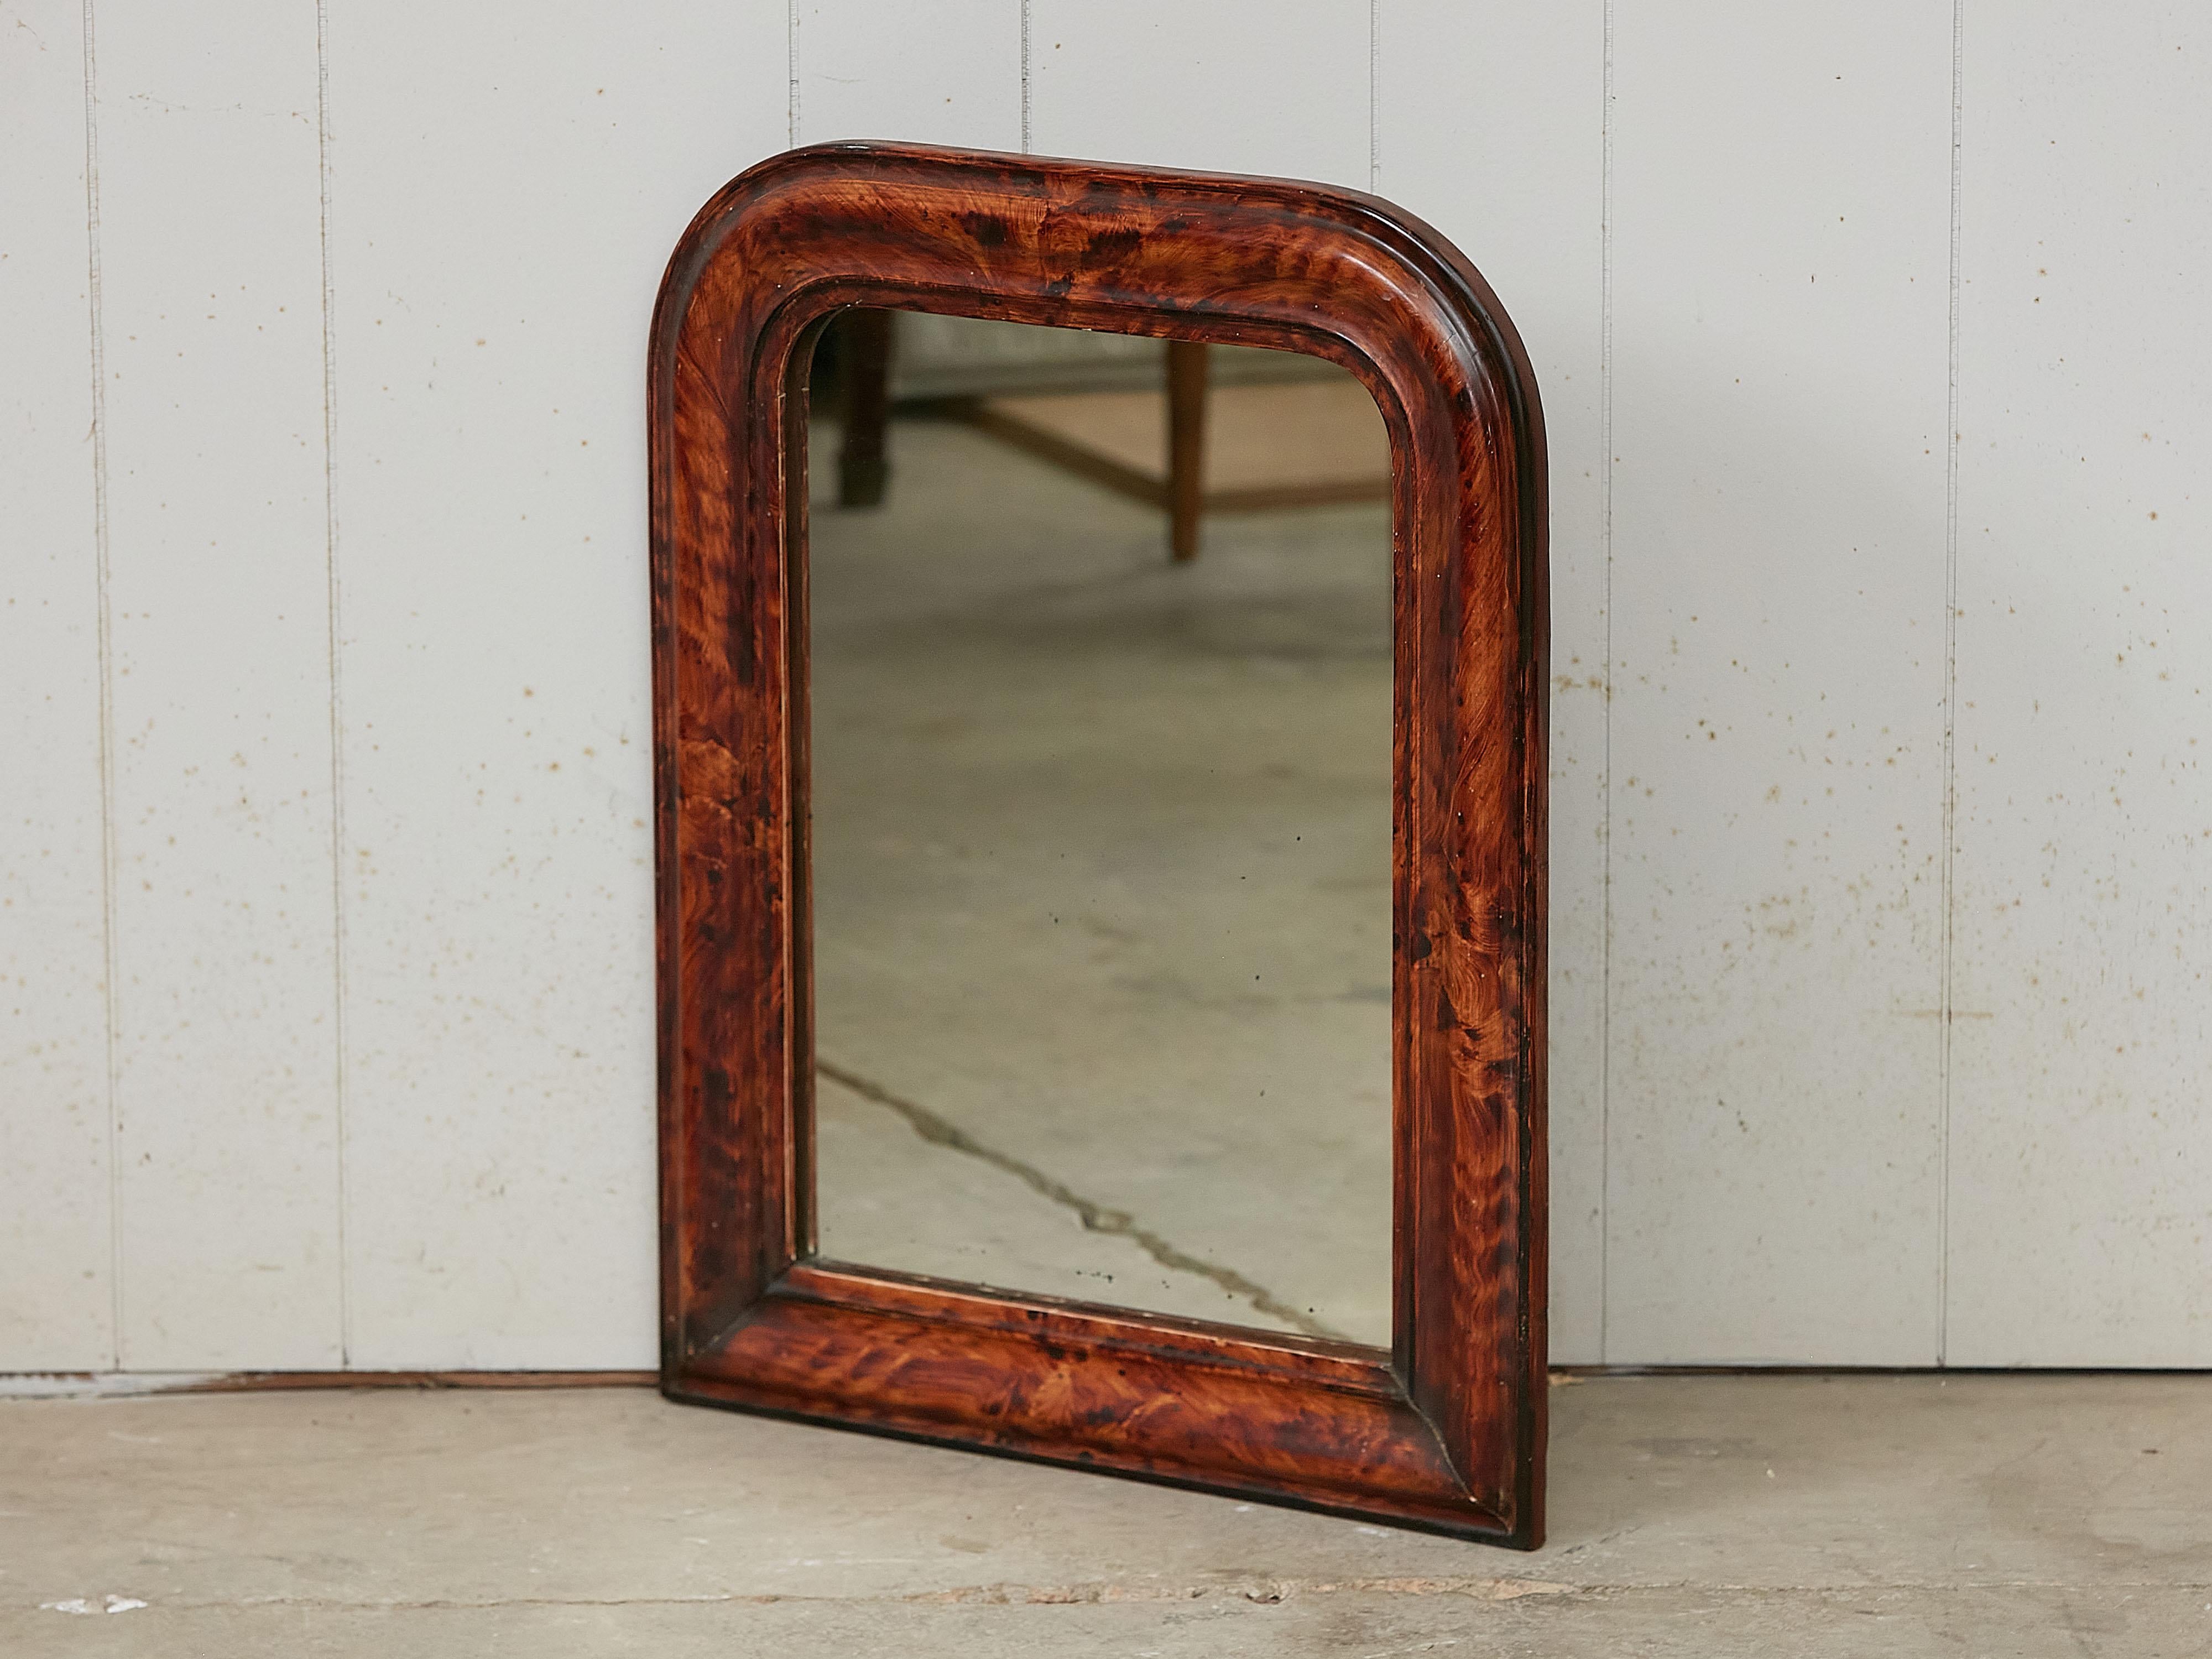 French 1900s Louis-Philippe Inspired Mirror with Faux Tortoise Painted Frame For Sale 2